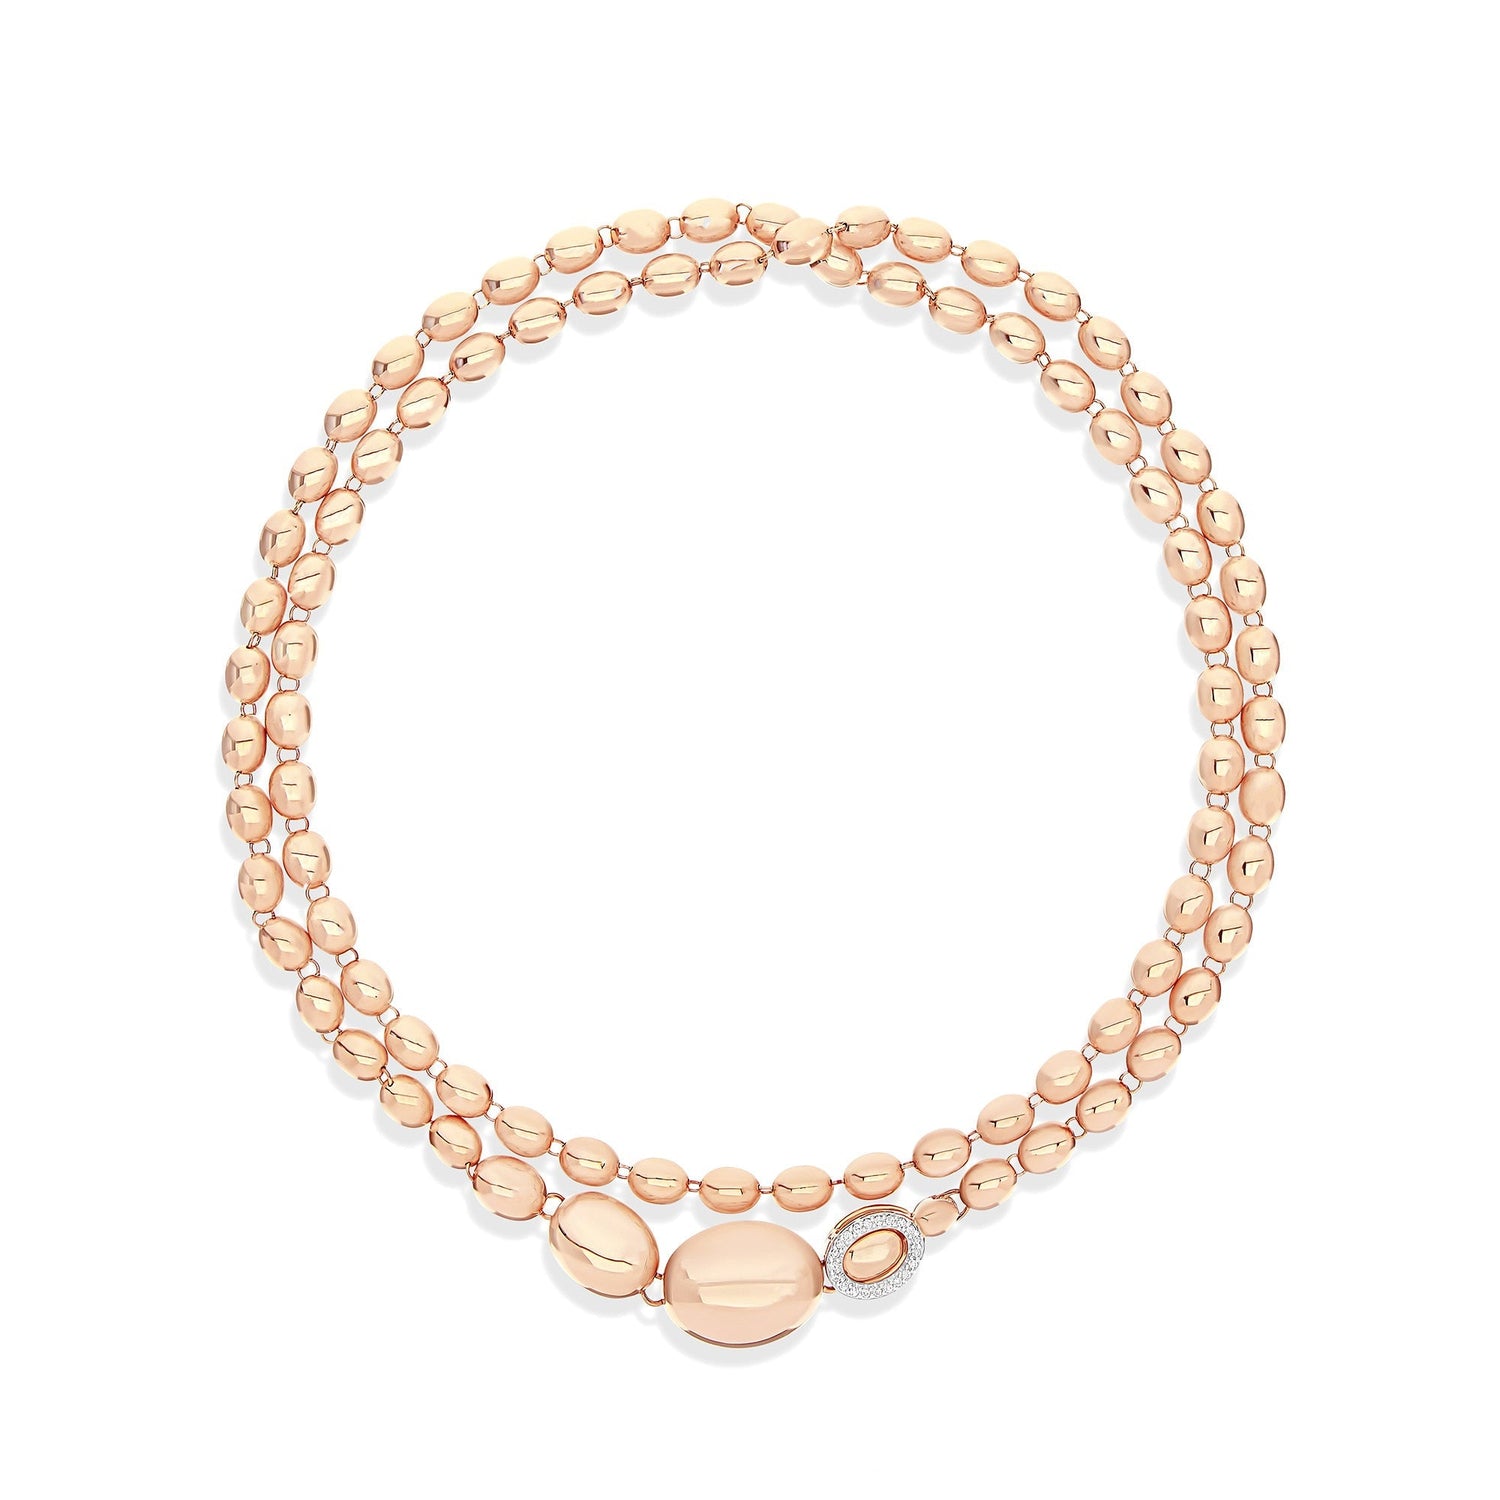 SUNSET "IVY" ROSE GOLD BOULES AND DIAMONDS ICONIC CONVERTIBLE NECKLACE